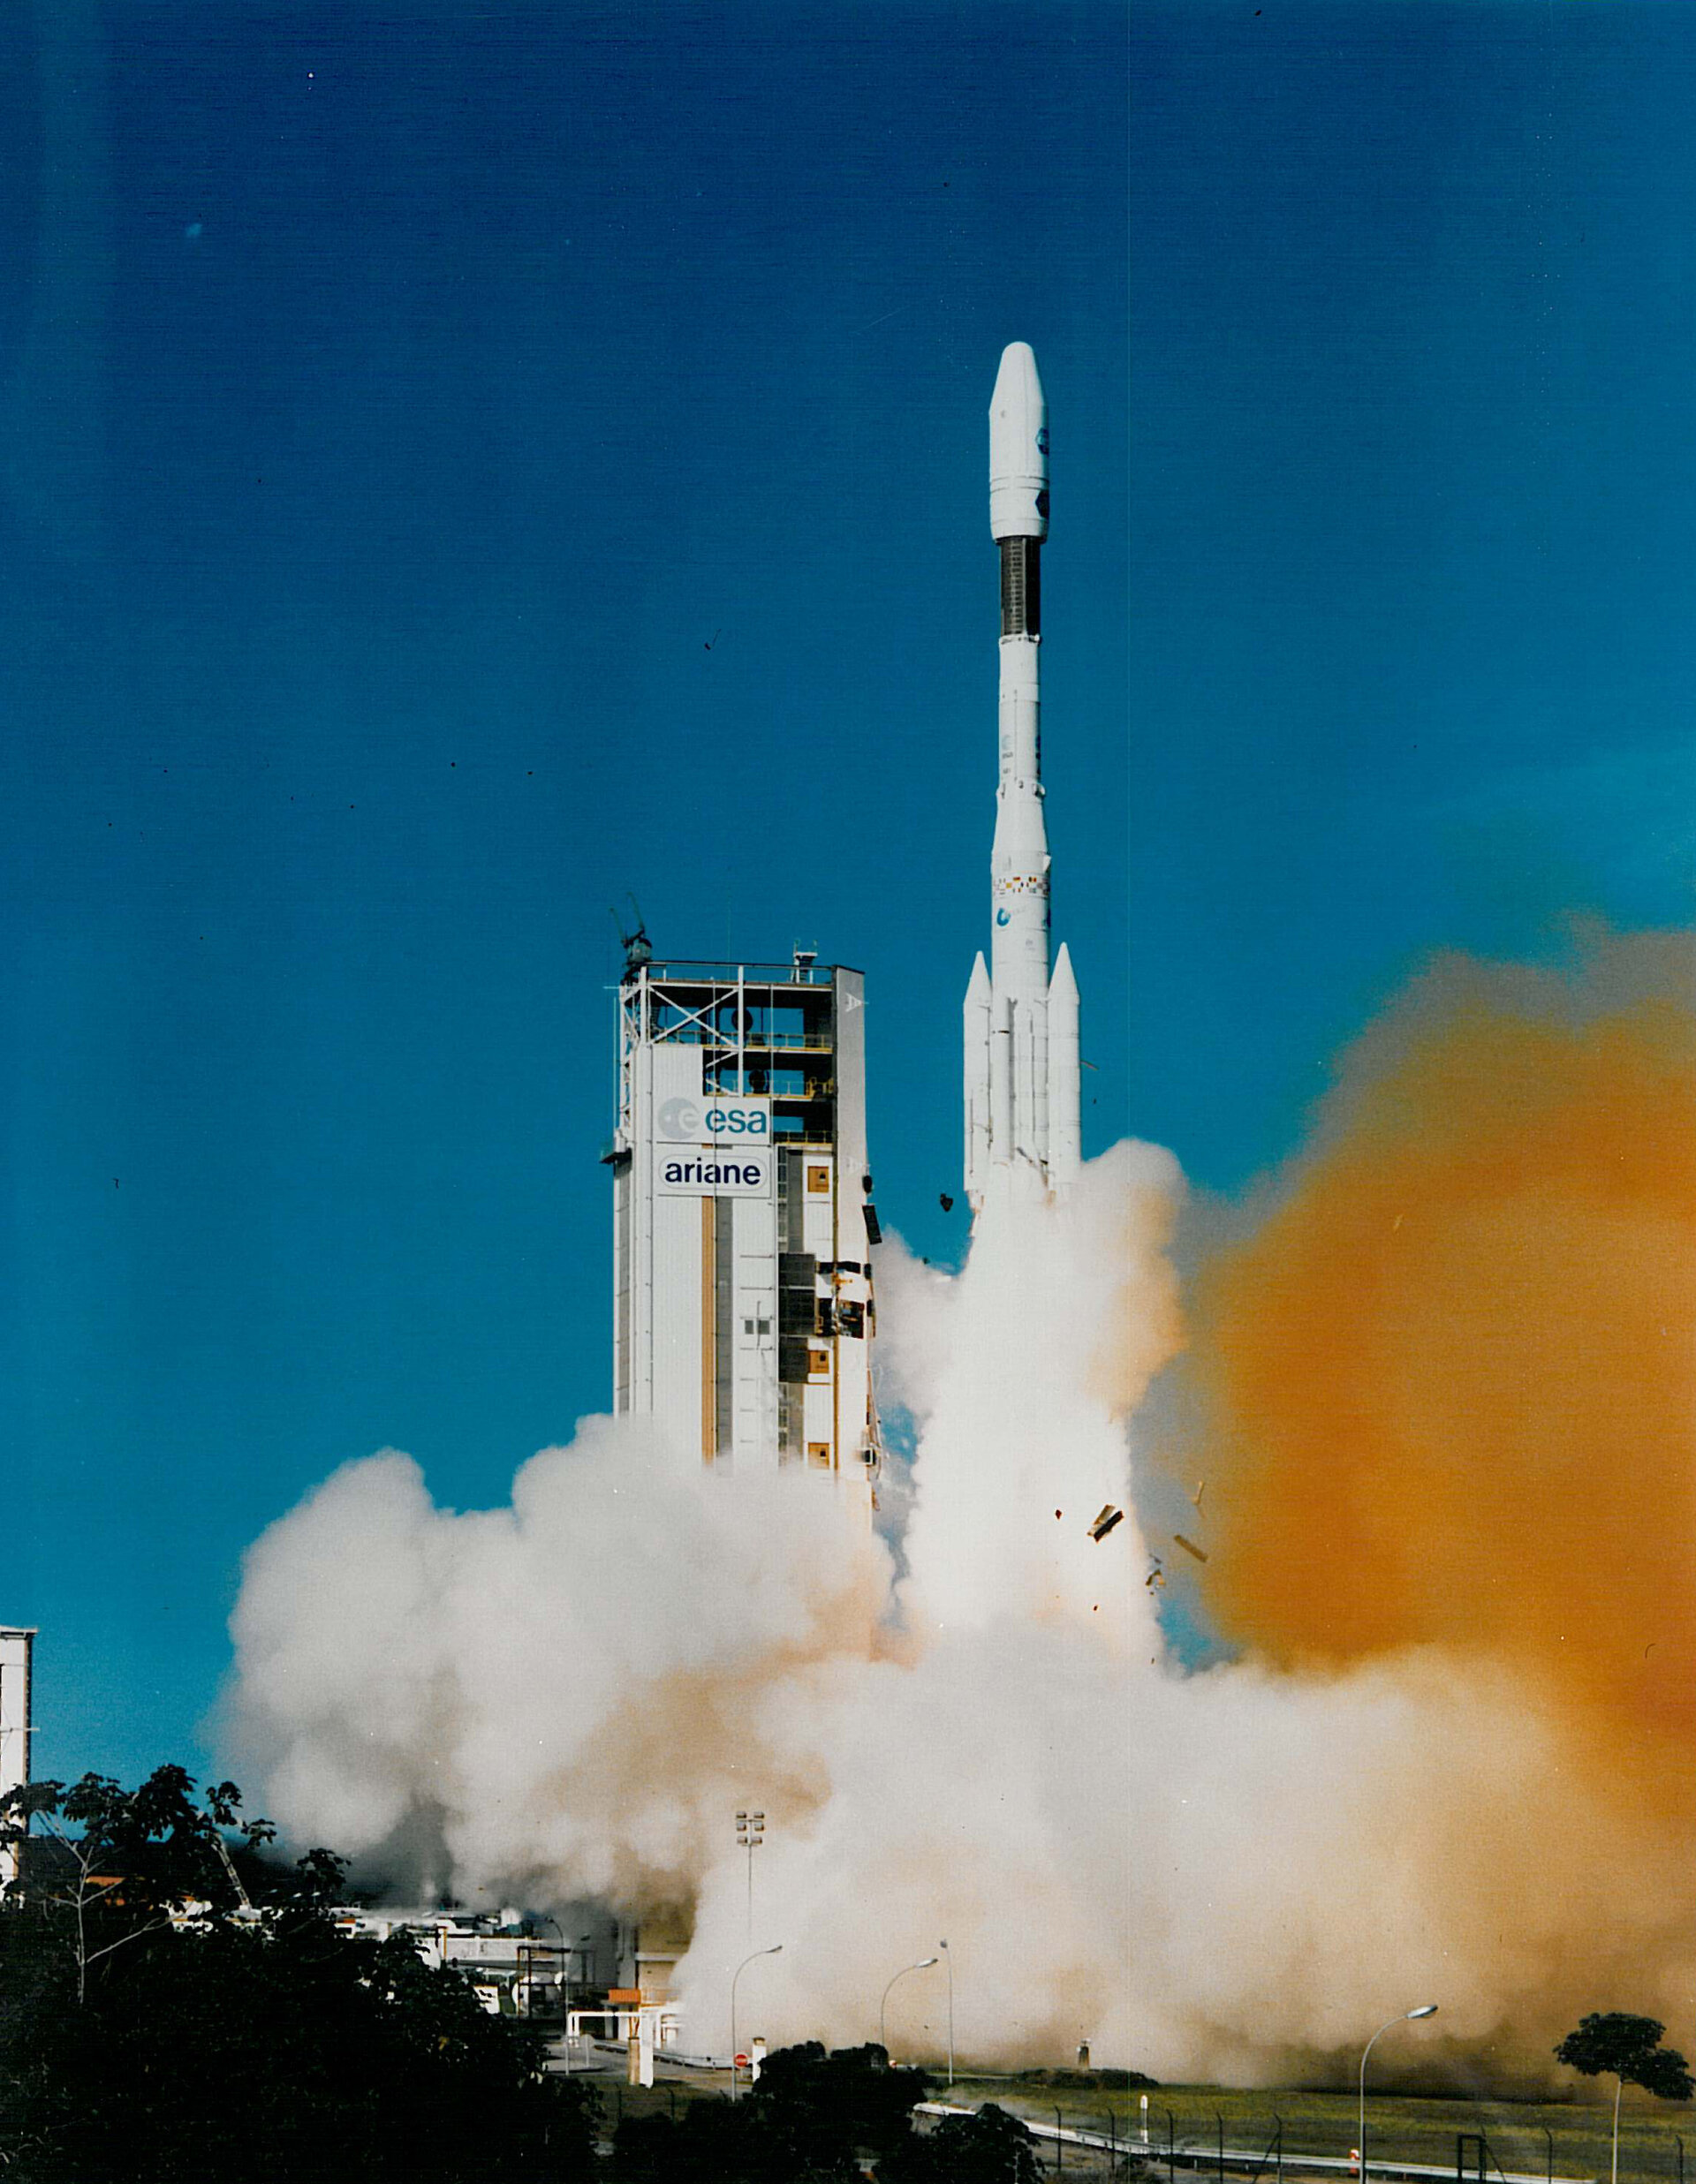 Ariane 4 launch carrying a triple payload in 1988